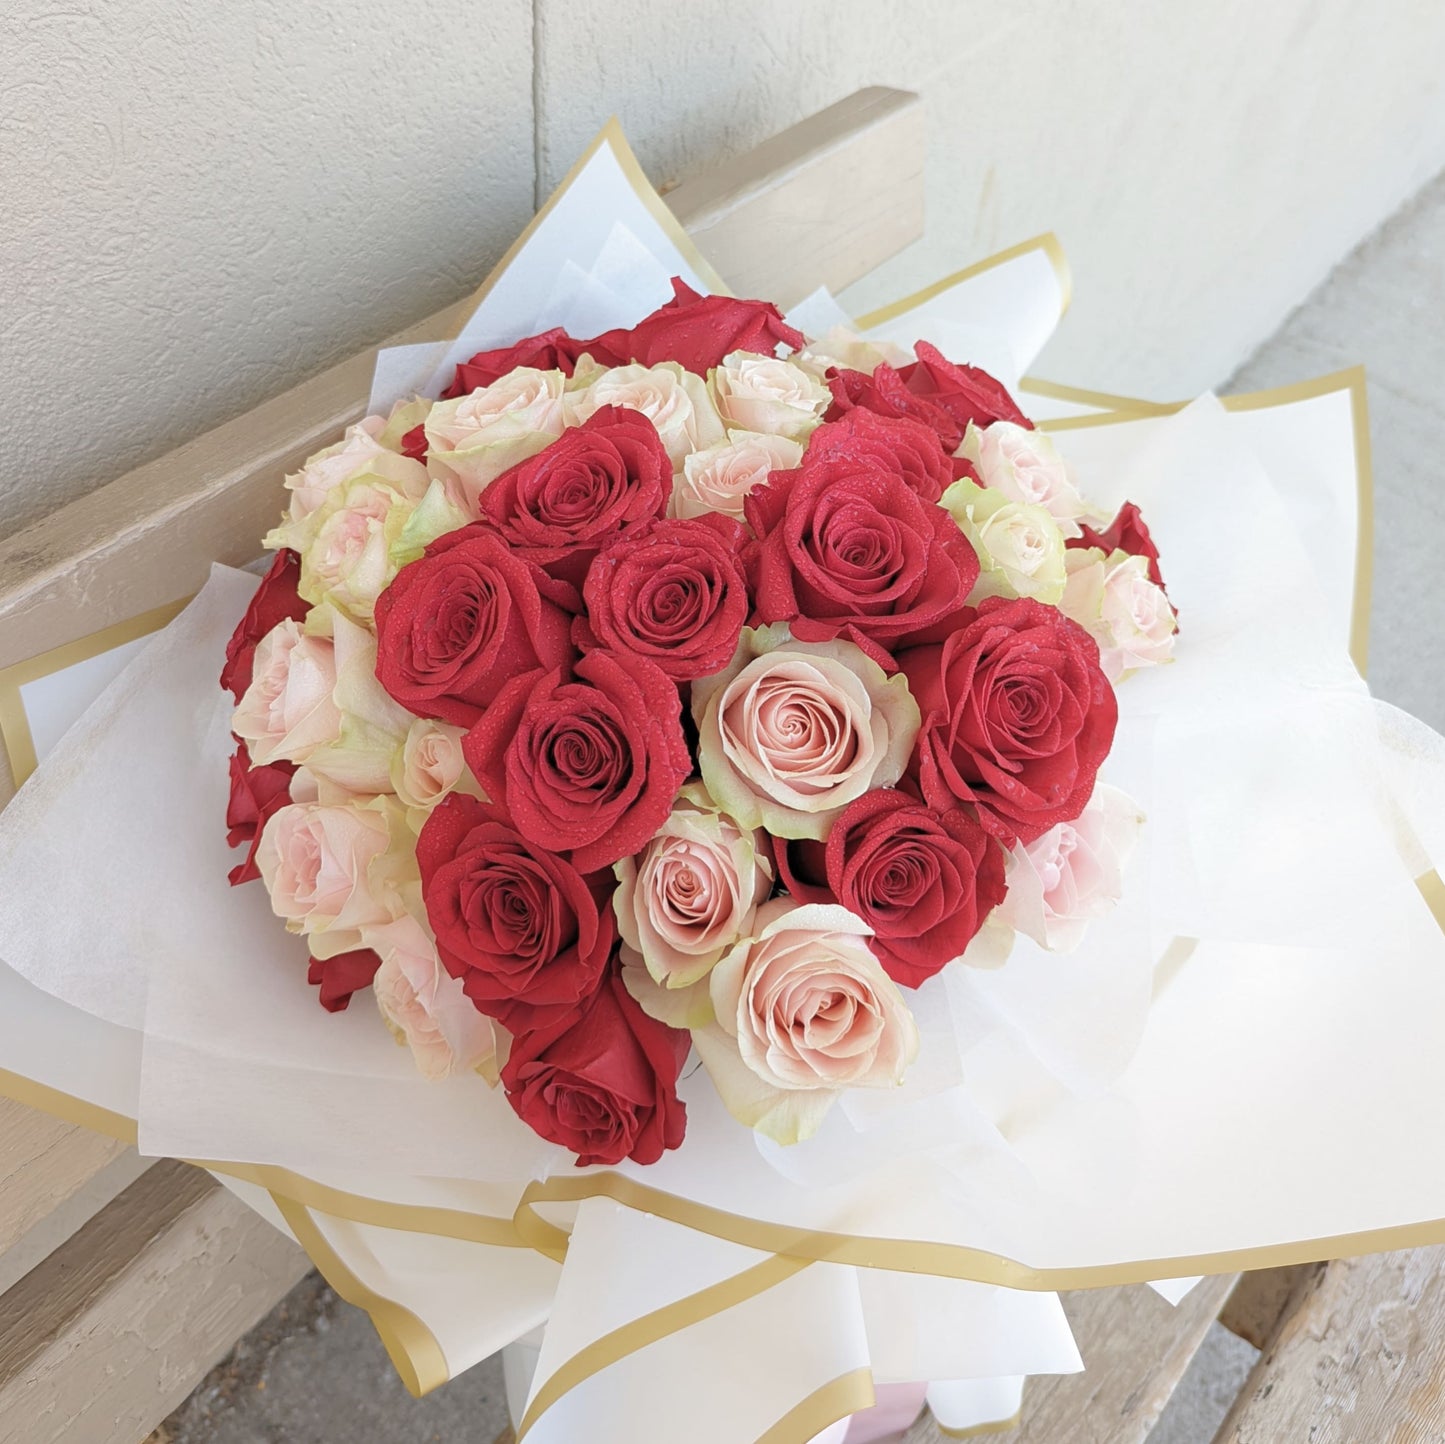 Just rose bouquet (50 mixed color)